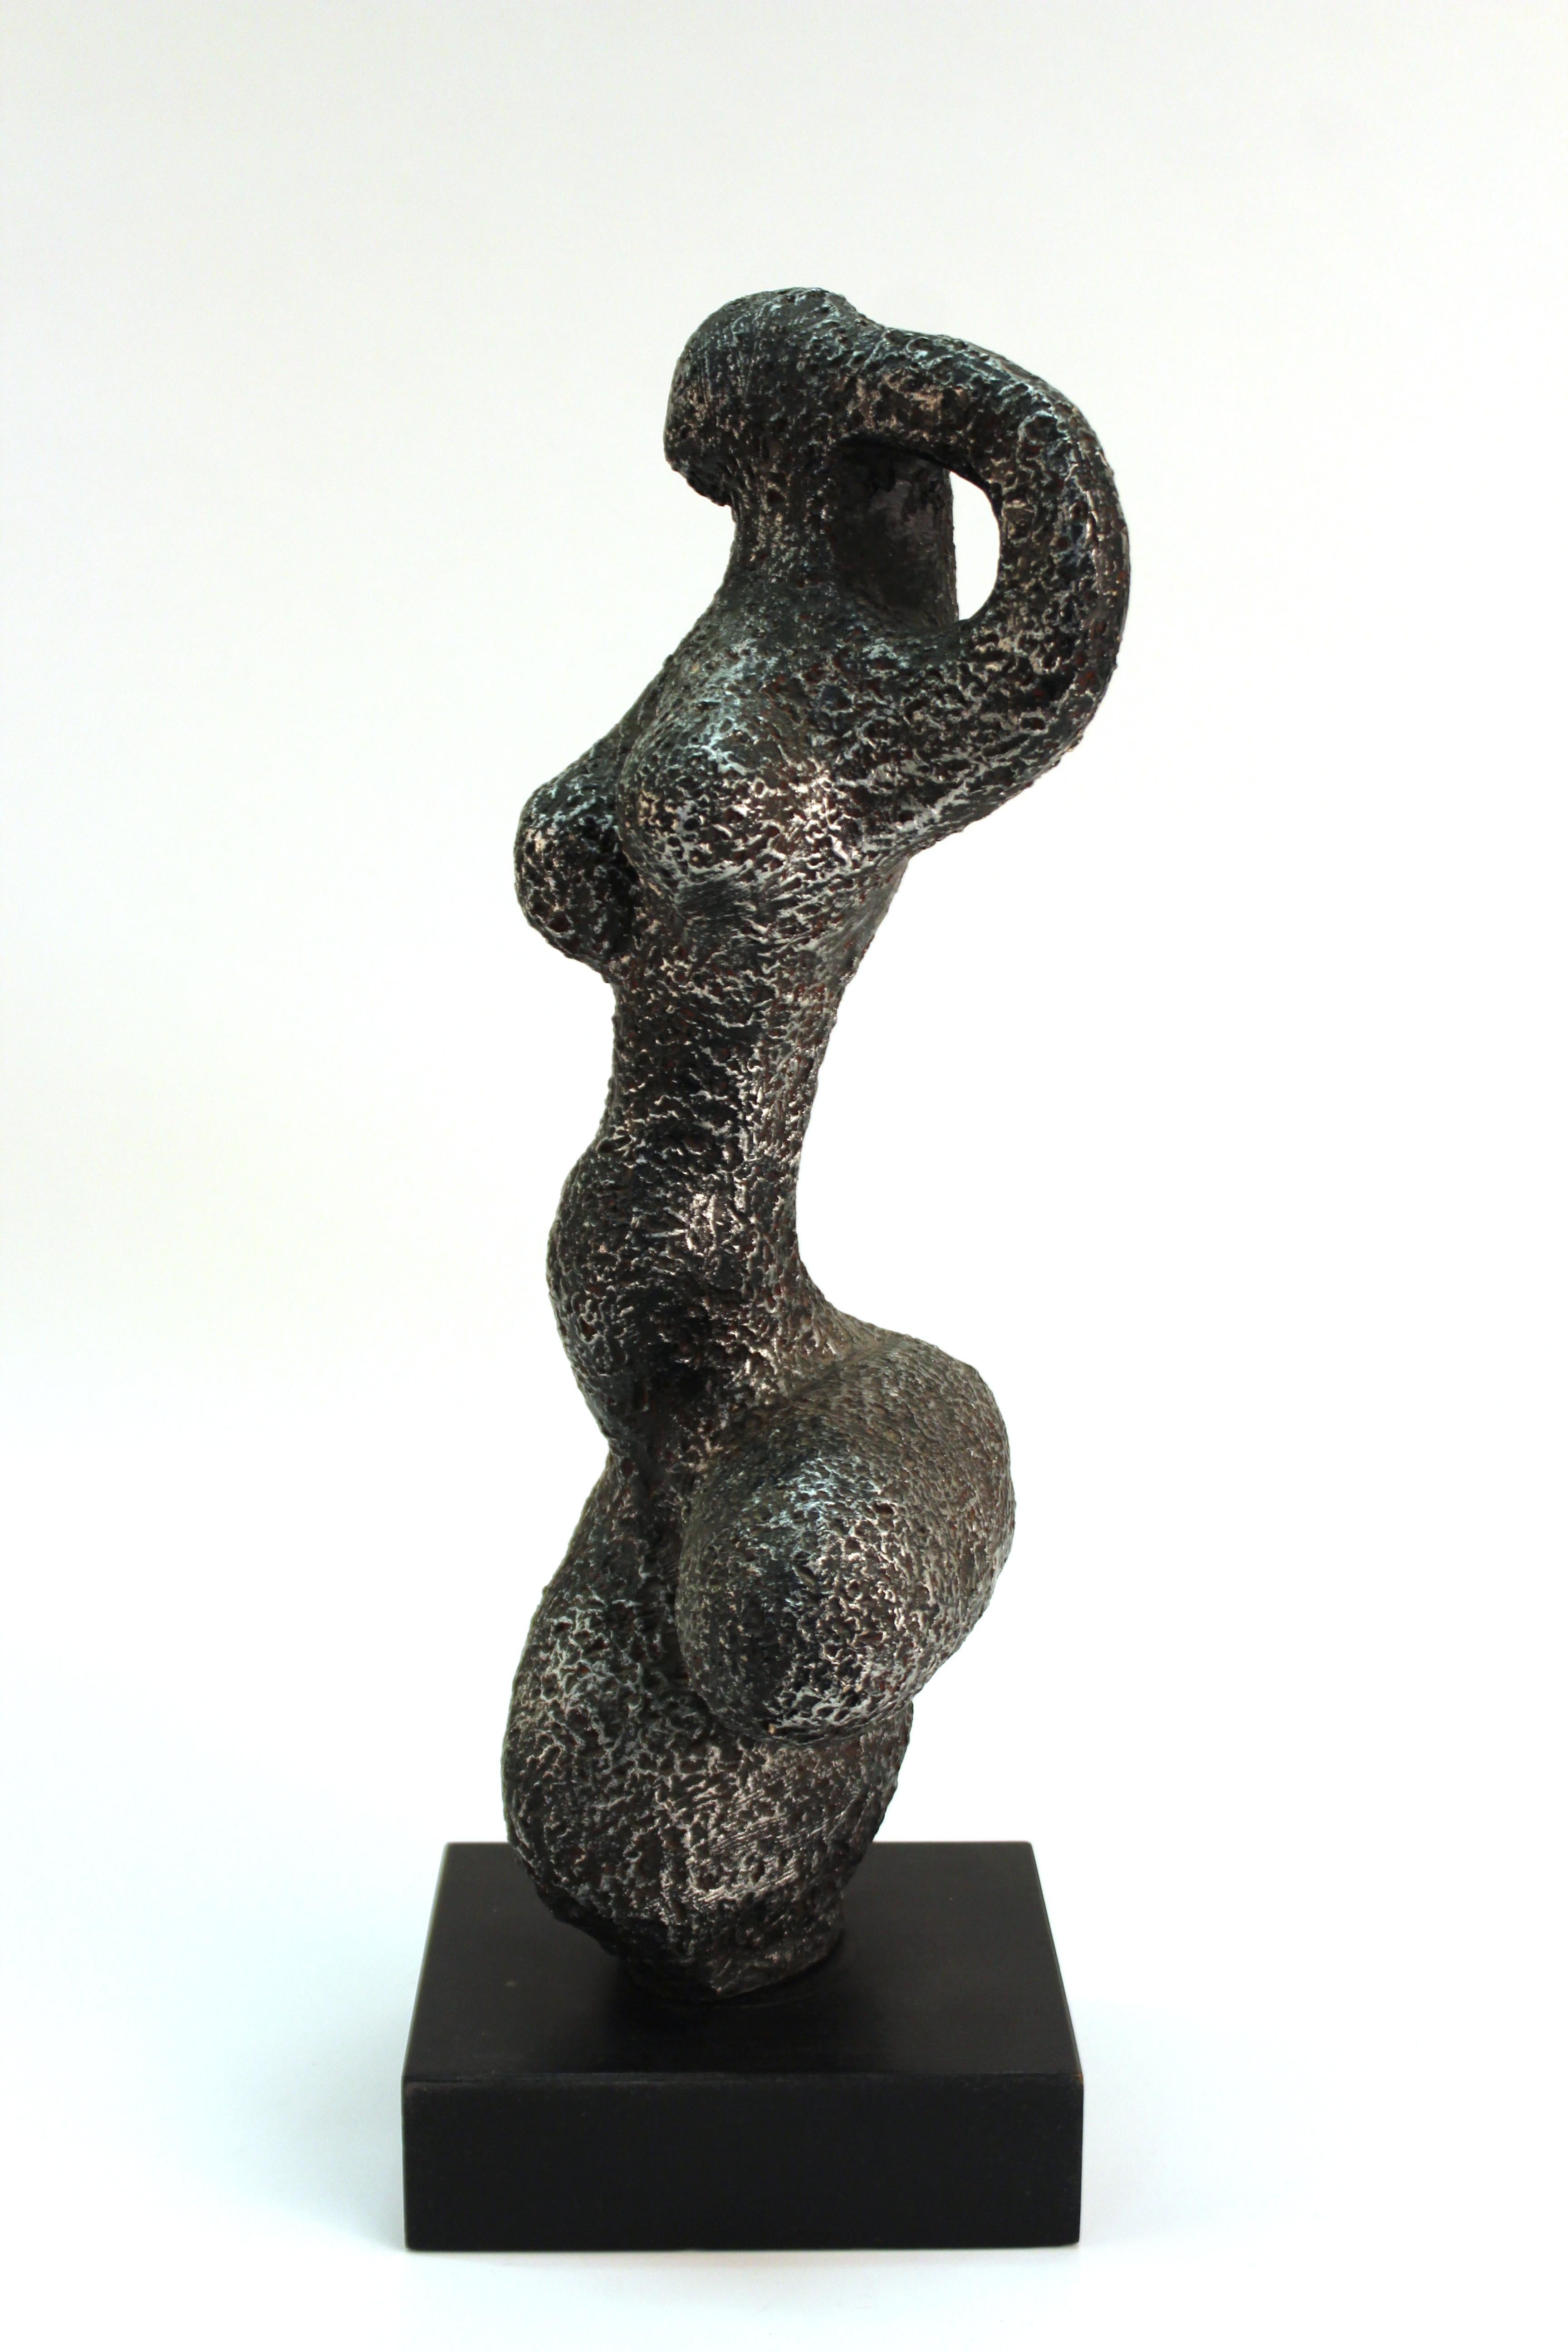 American Brutalist abstract female nude sculpture made by Austin Productions. The piece dates from the 1970s and is in great vintage condition with some minor age-appropriate wear to the base.